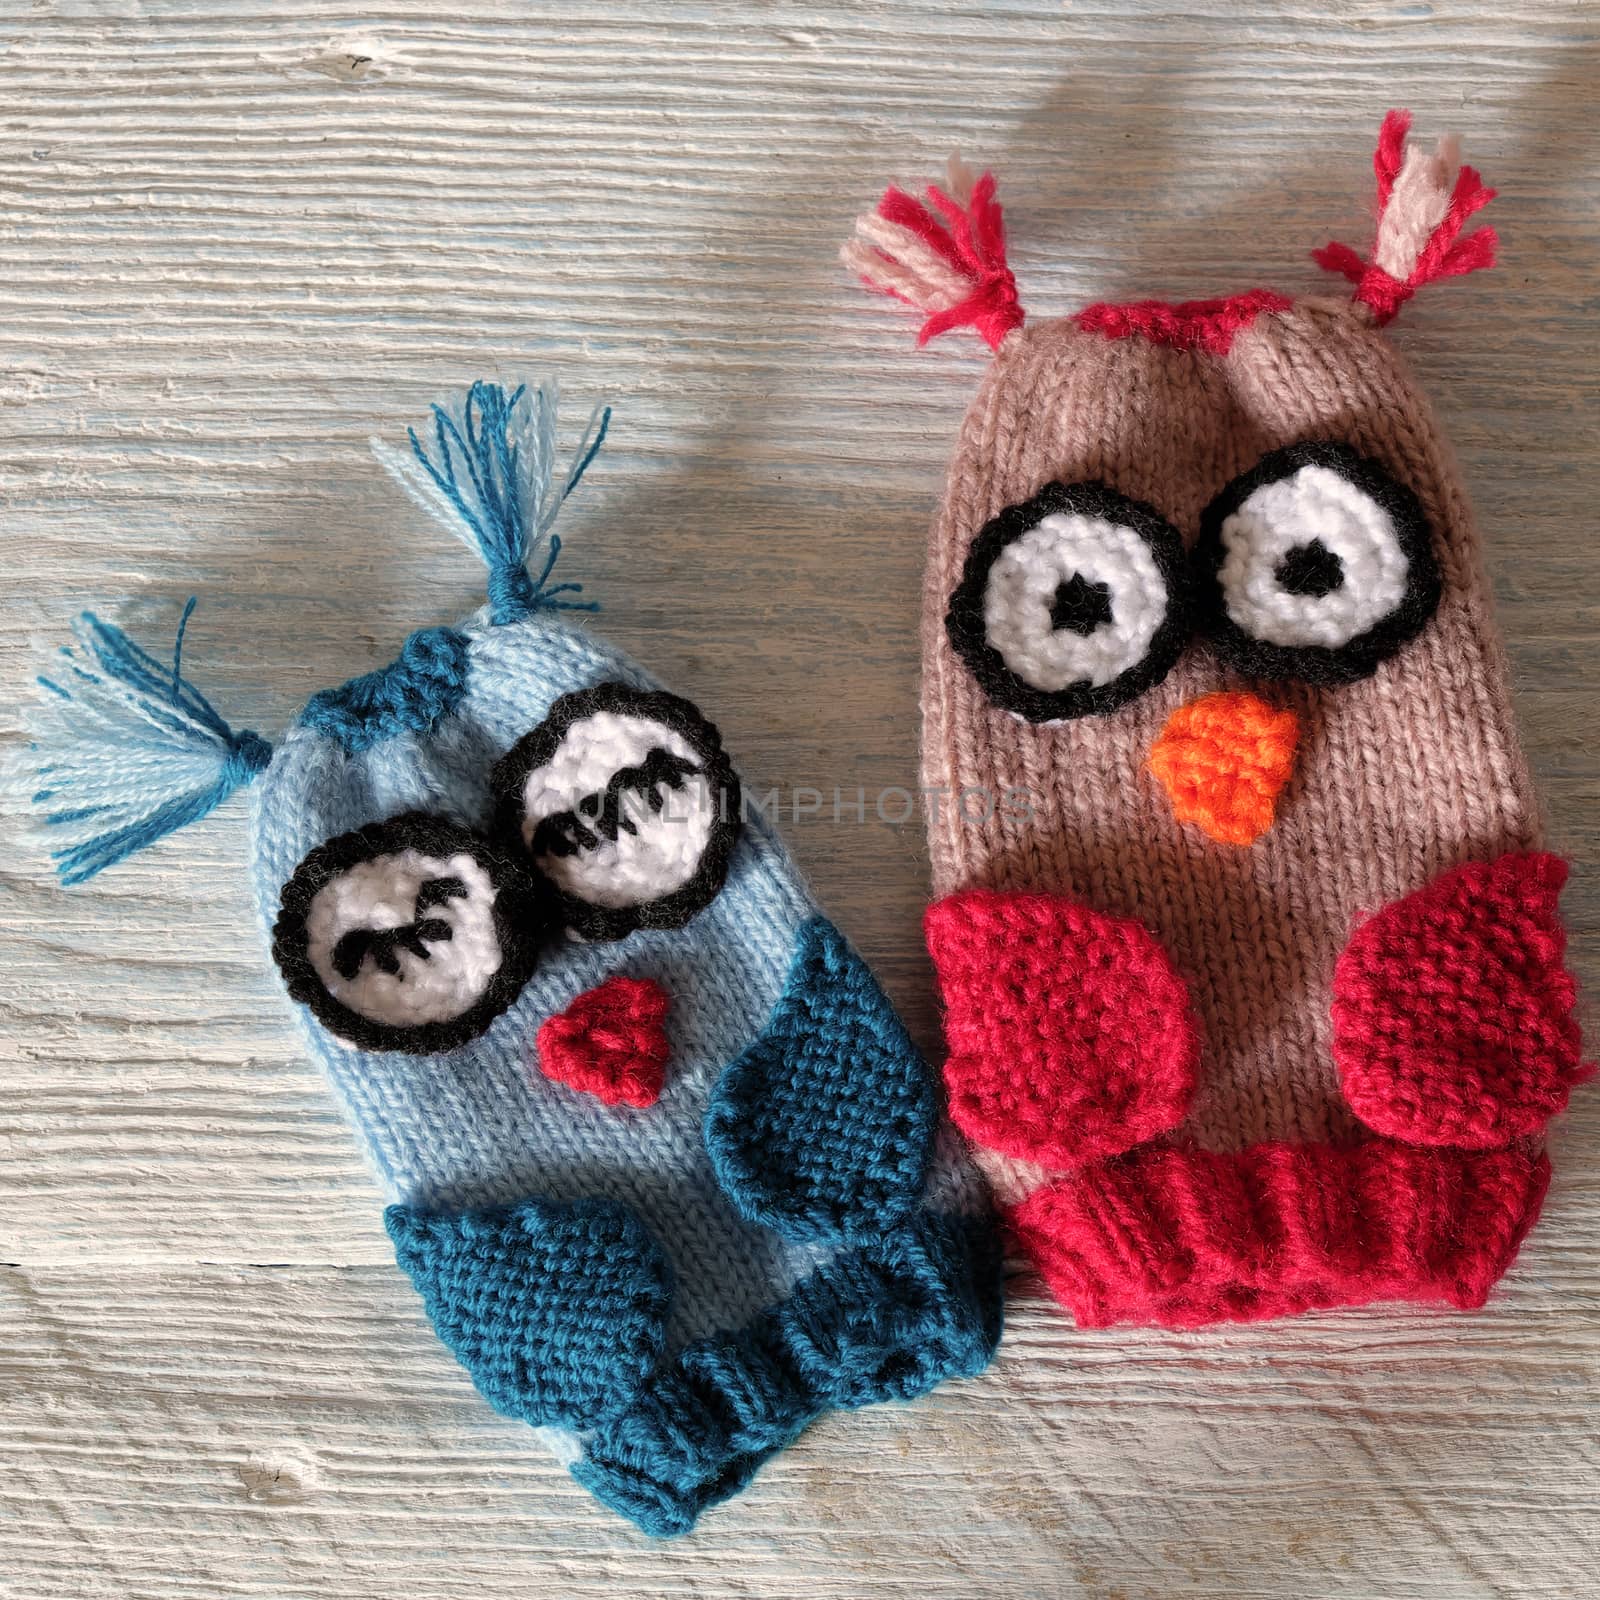 Hand puppets for children day, colorful owl puppet knit from yarn, funny handmade gift for child day on white wooden background